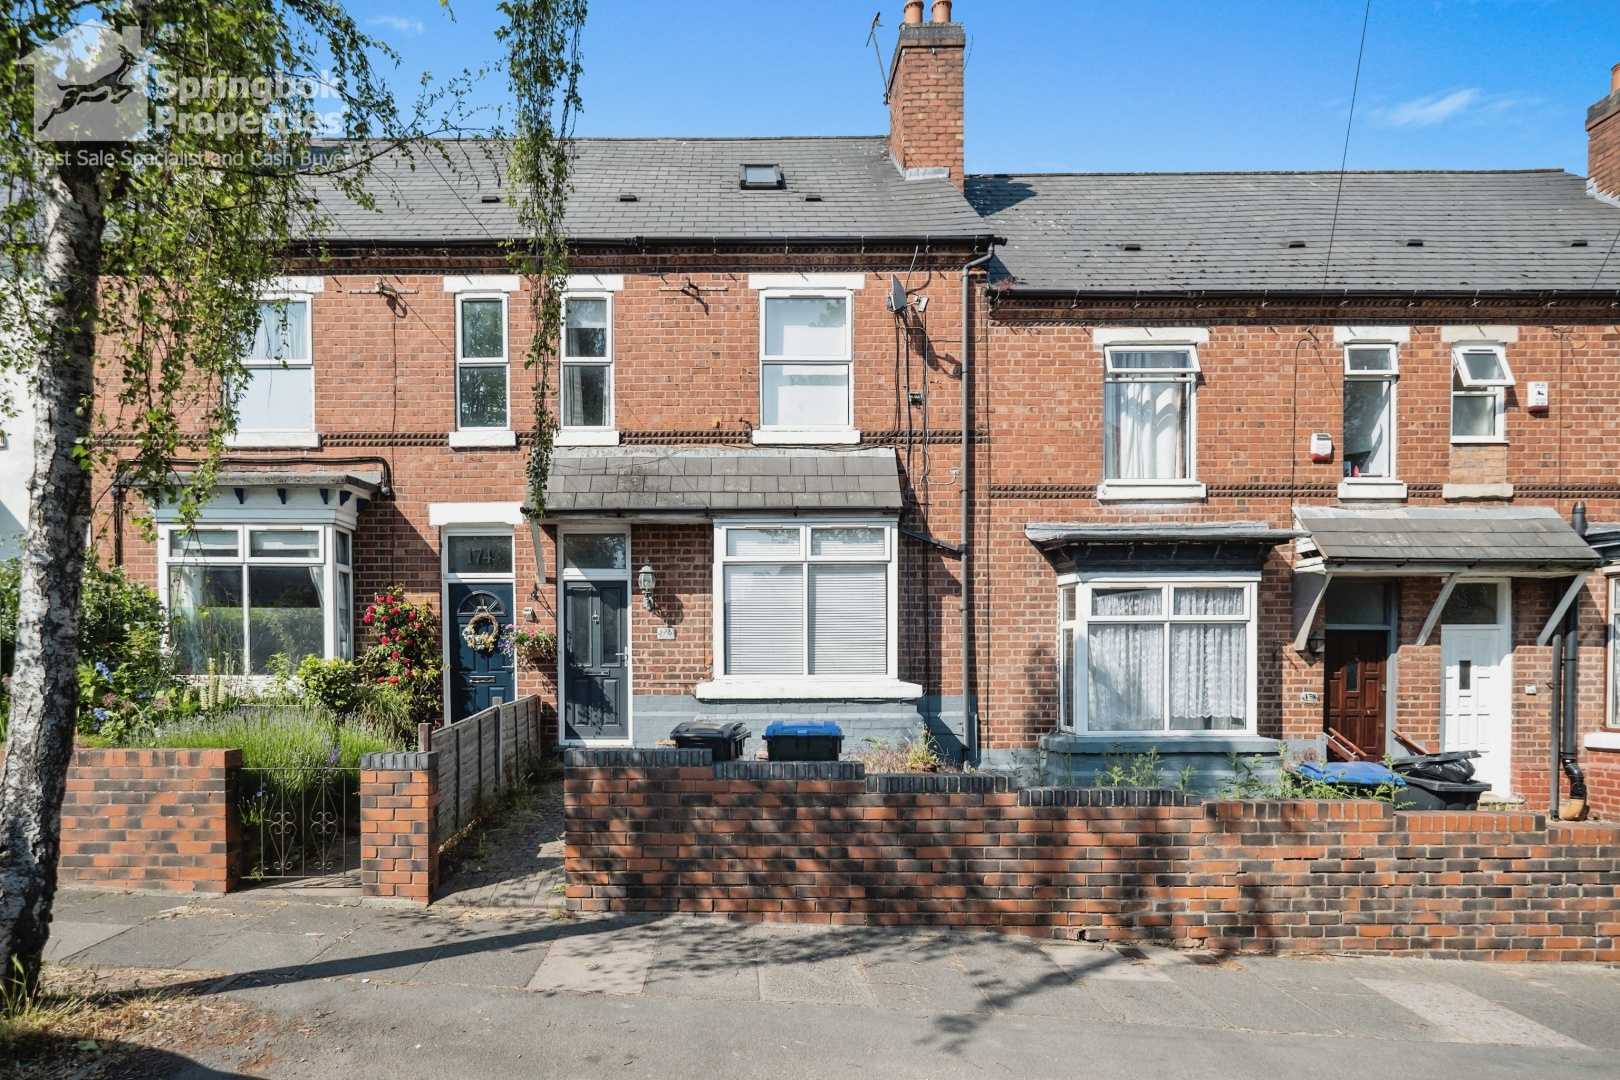 House in Great Barr, Sandwell 11866419